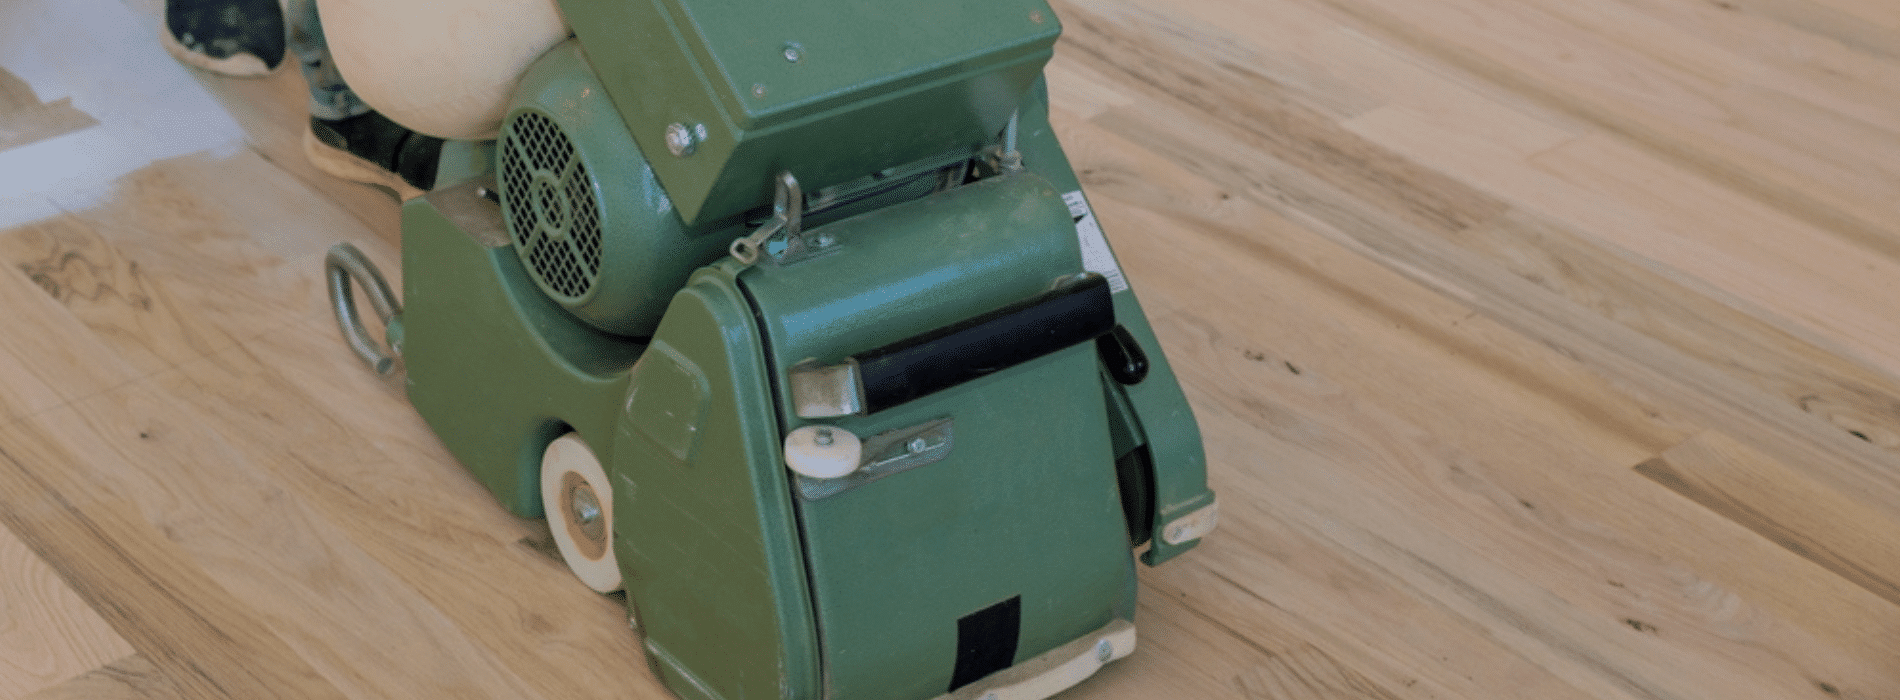 In Uxbridge, UB8, Mr Sander® are using a Bona Scorpion, a 200 mm drum sander with 1.5 kW power and 240 V voltage, to sand a parquet floor. The sander operates at a frequency of 50 Hz and is connected to a dust extraction system with a HEPA filter, ensuring a clean and efficient outcome.